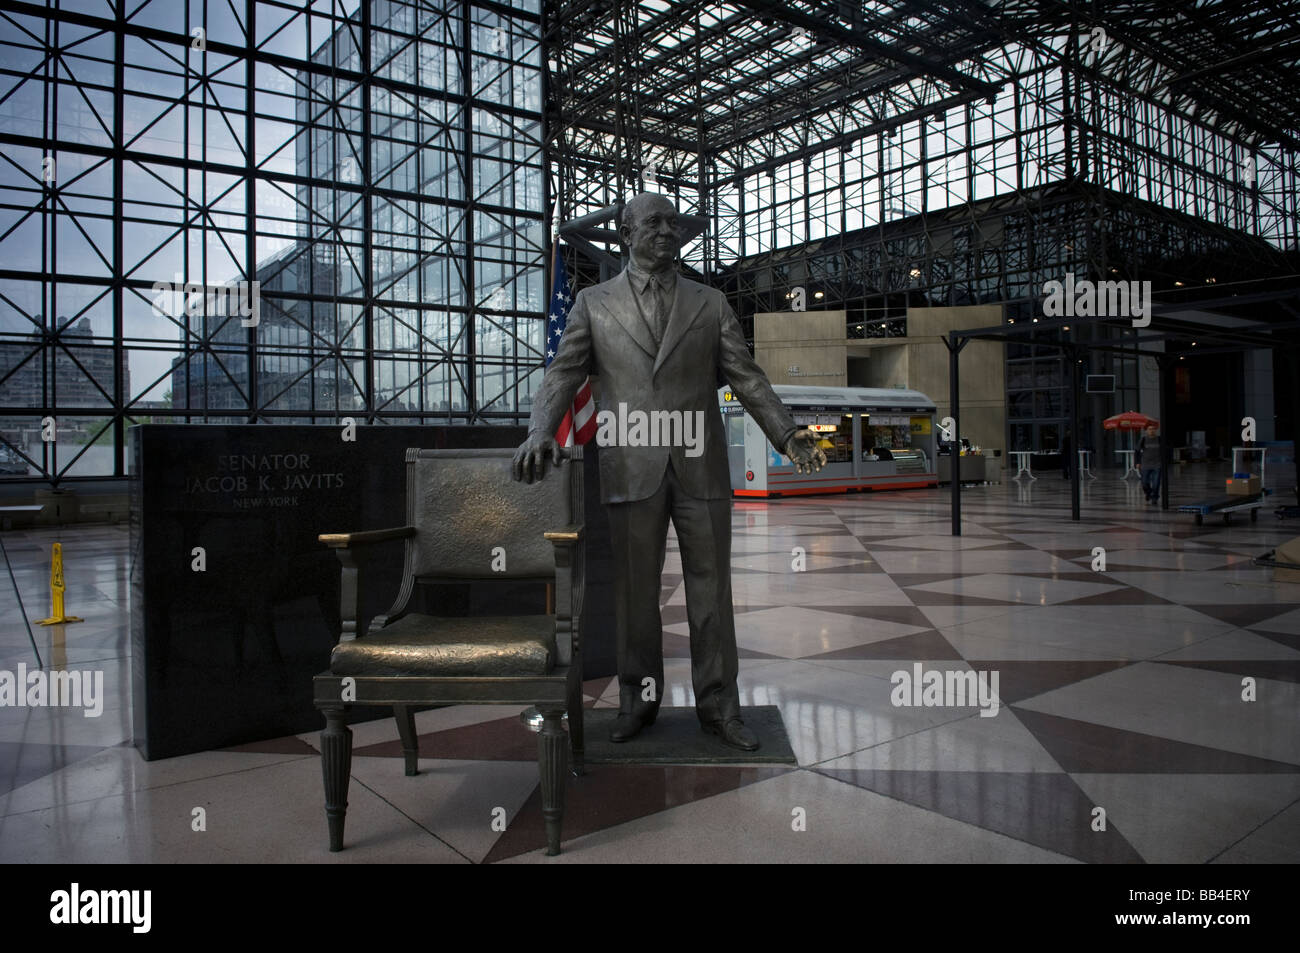 A statue of US Senator Jacob K Javits at the Jacob K Javits Convention Center in New York Stock Photo